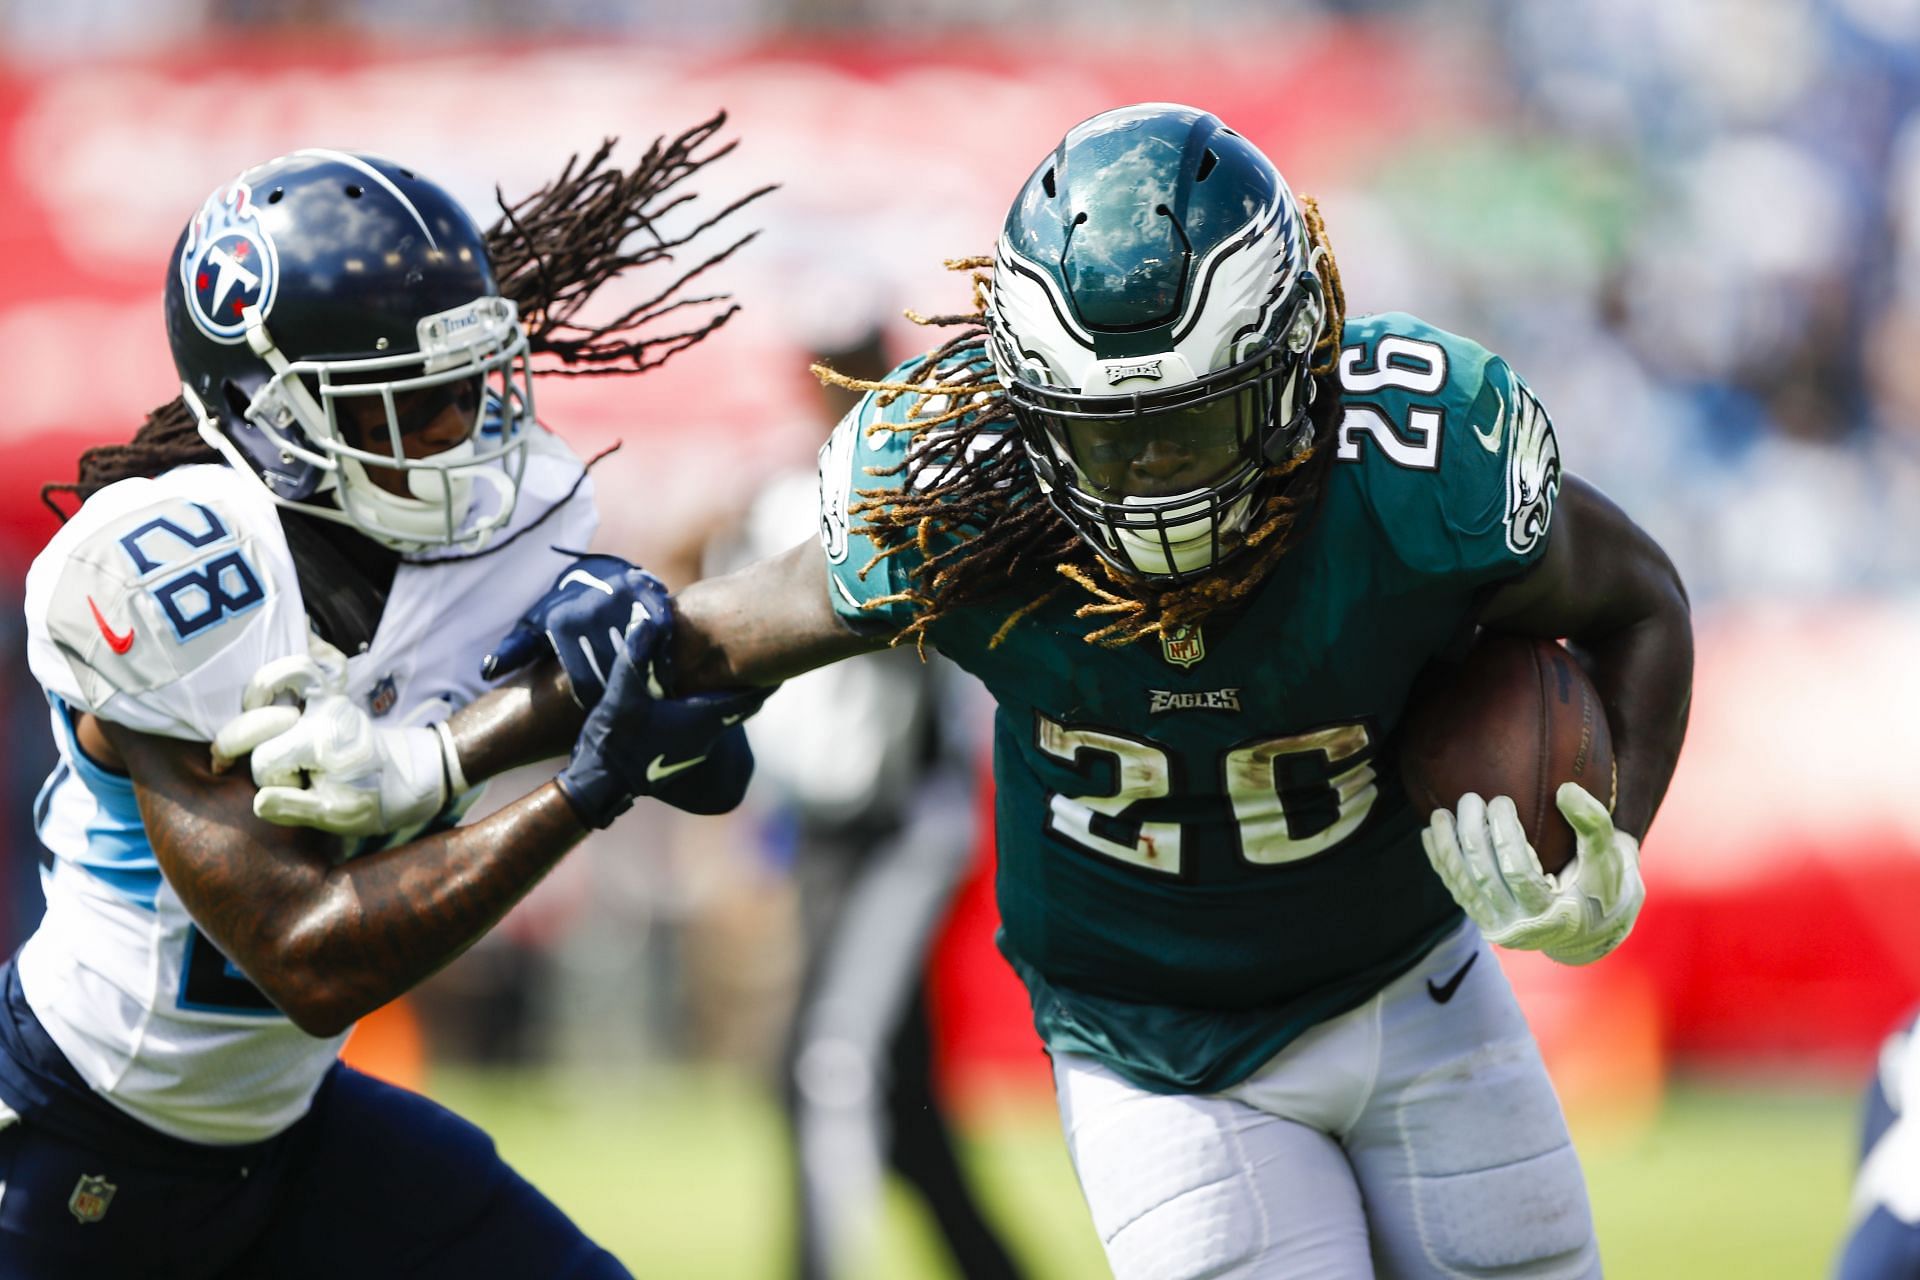 Jay Ajayi: Tattoos, Arsenal and his own 'yurp' brand - the NFL